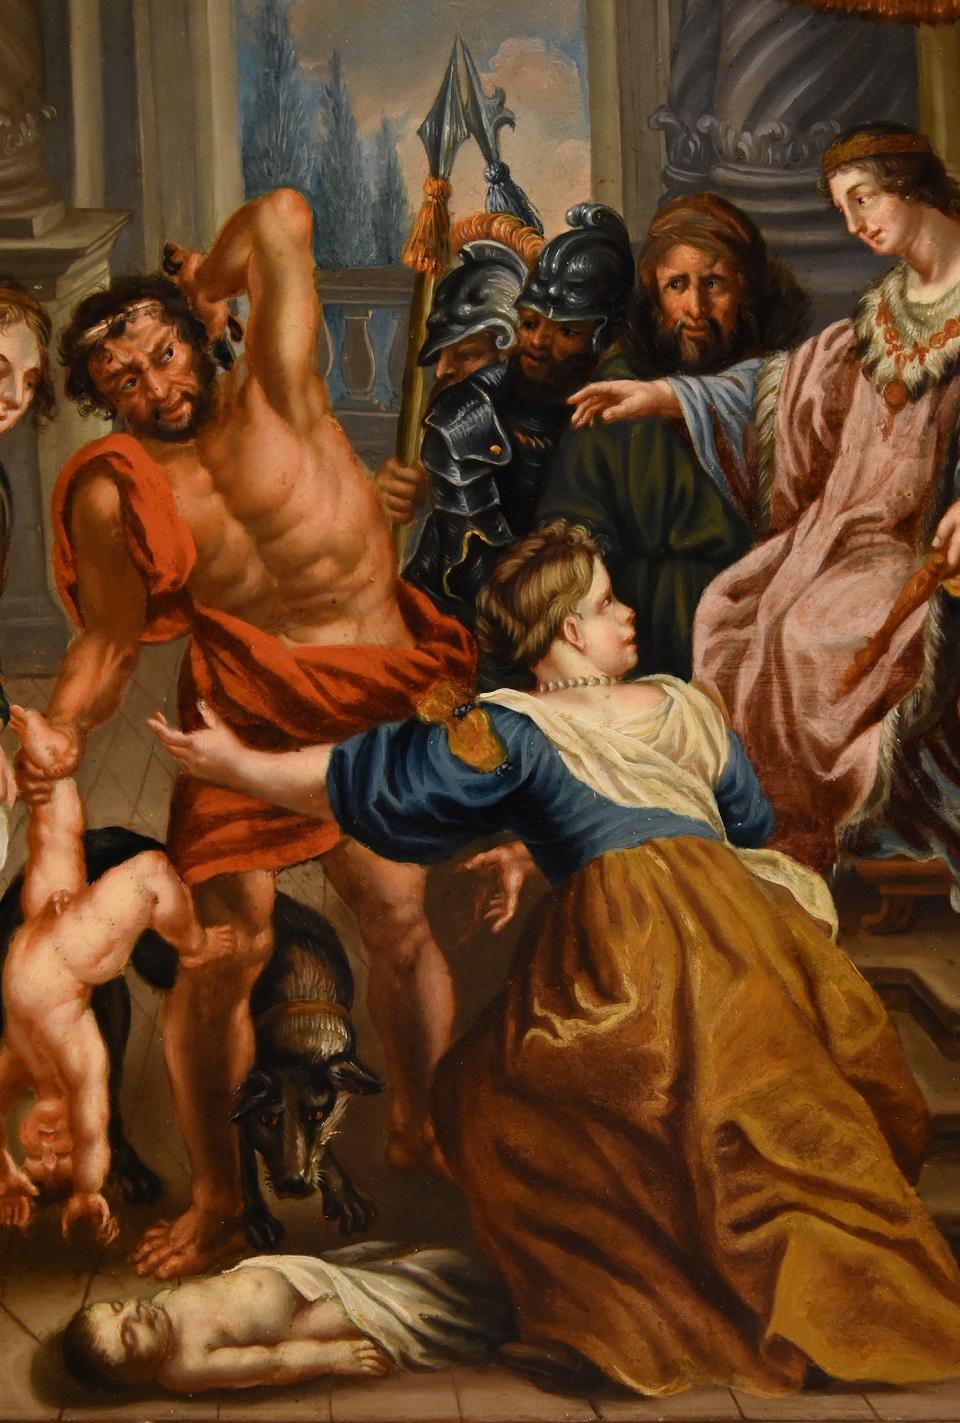 which of the following qualities are present in the work of peter paul rubens